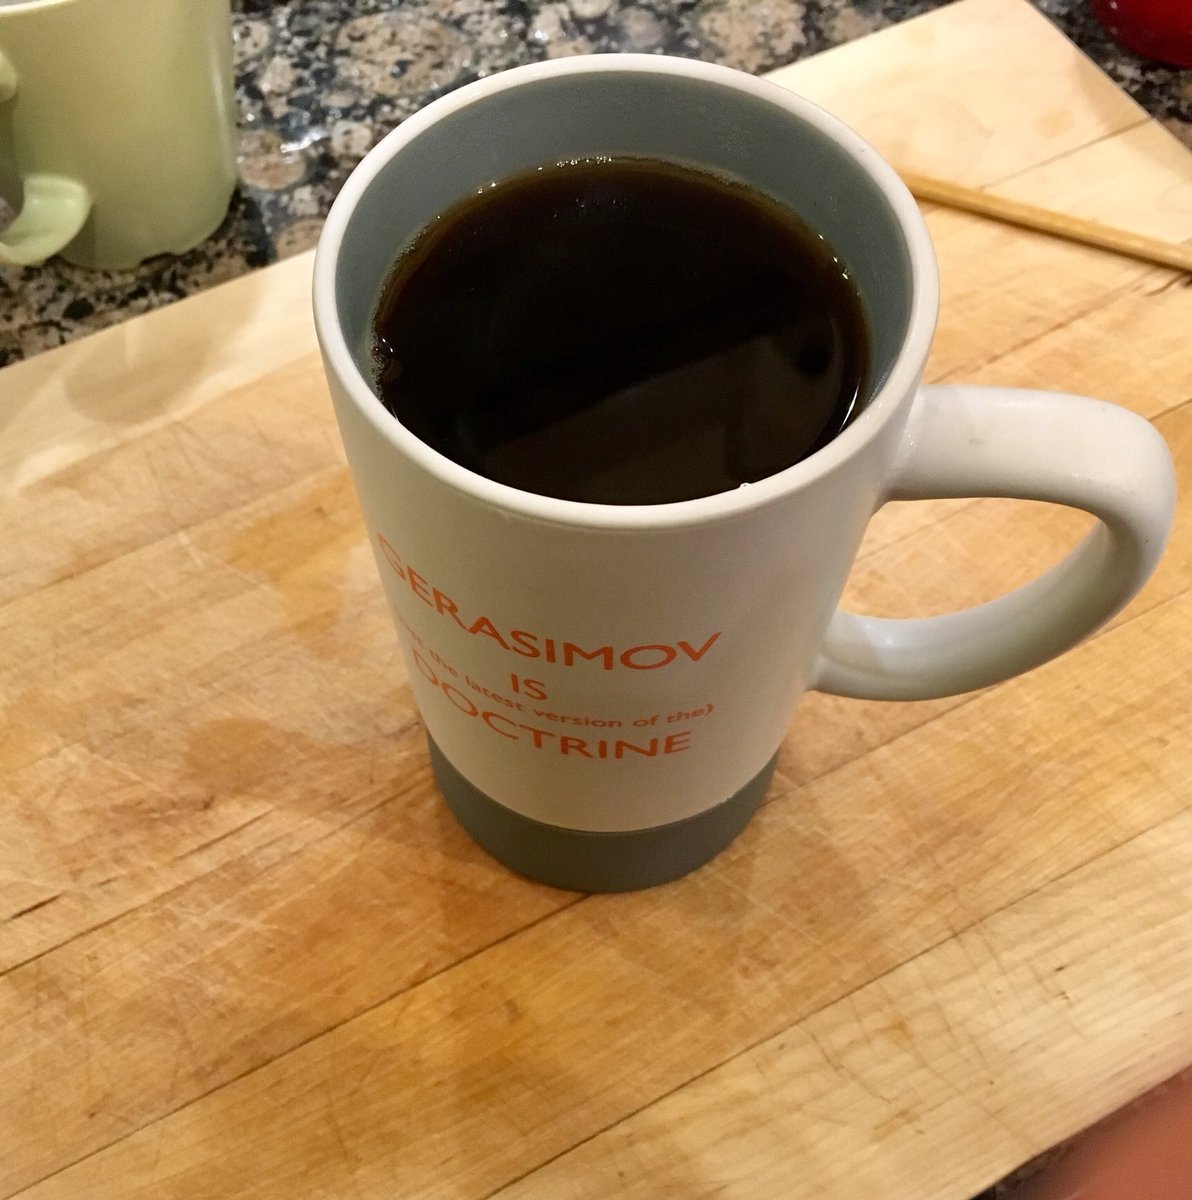 You will have a gorgeous cup of coffee. And a traveler for your neighbor in your Idaho mug, if you are nice and seeking egg coffee converts. Leave the rest on the stove, or pour off into a pot. Whatever. /25